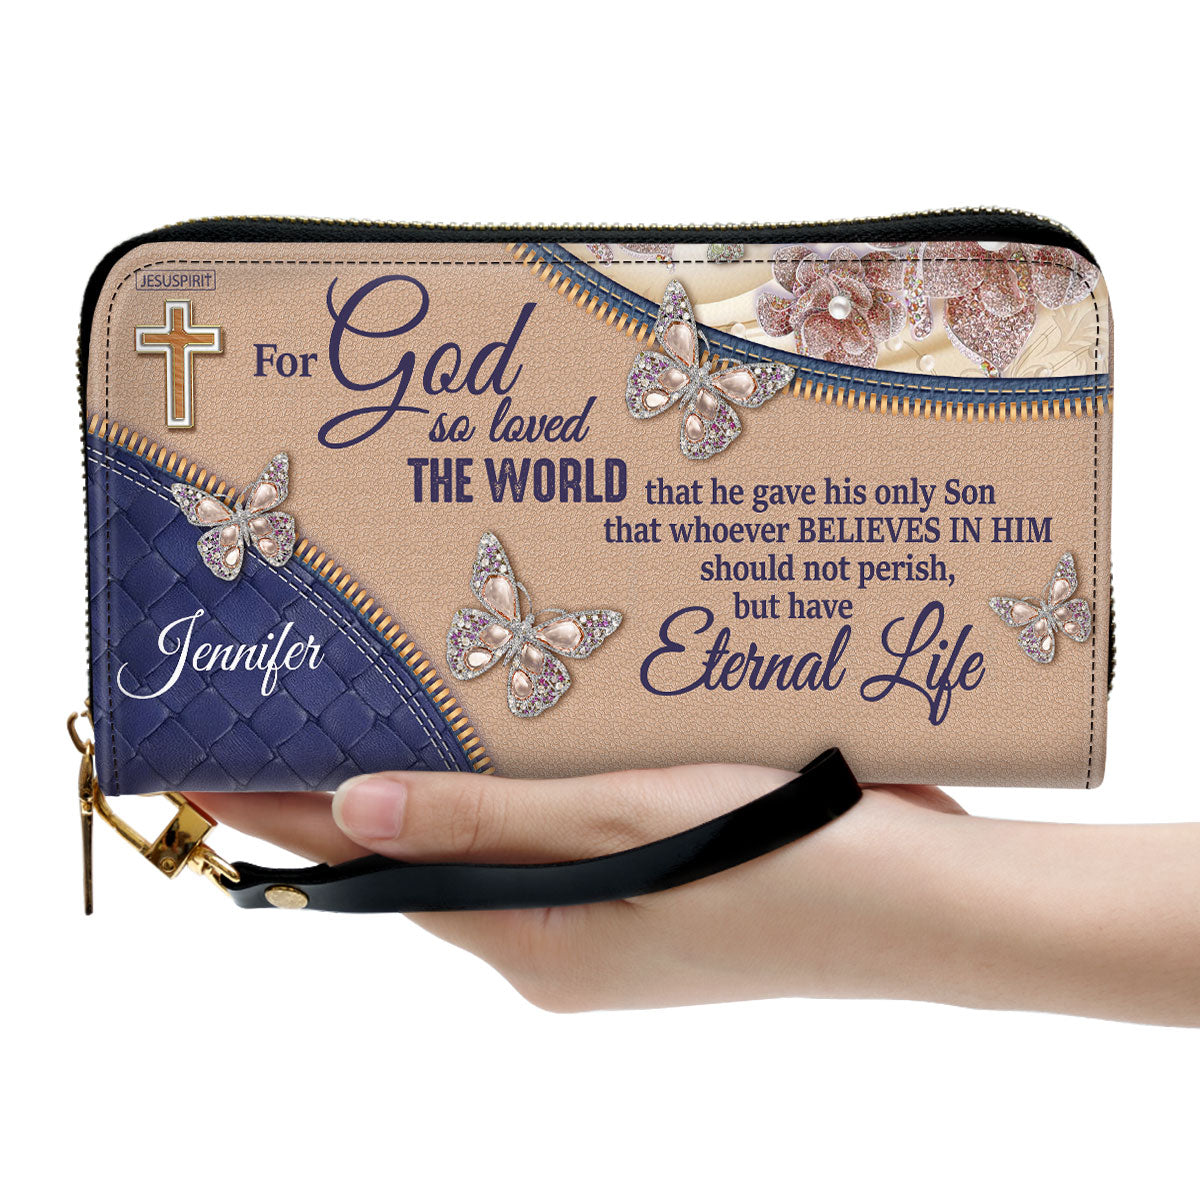 Women Clutch Purse - For God So Loved The World - Special Personalized Clutch Purse